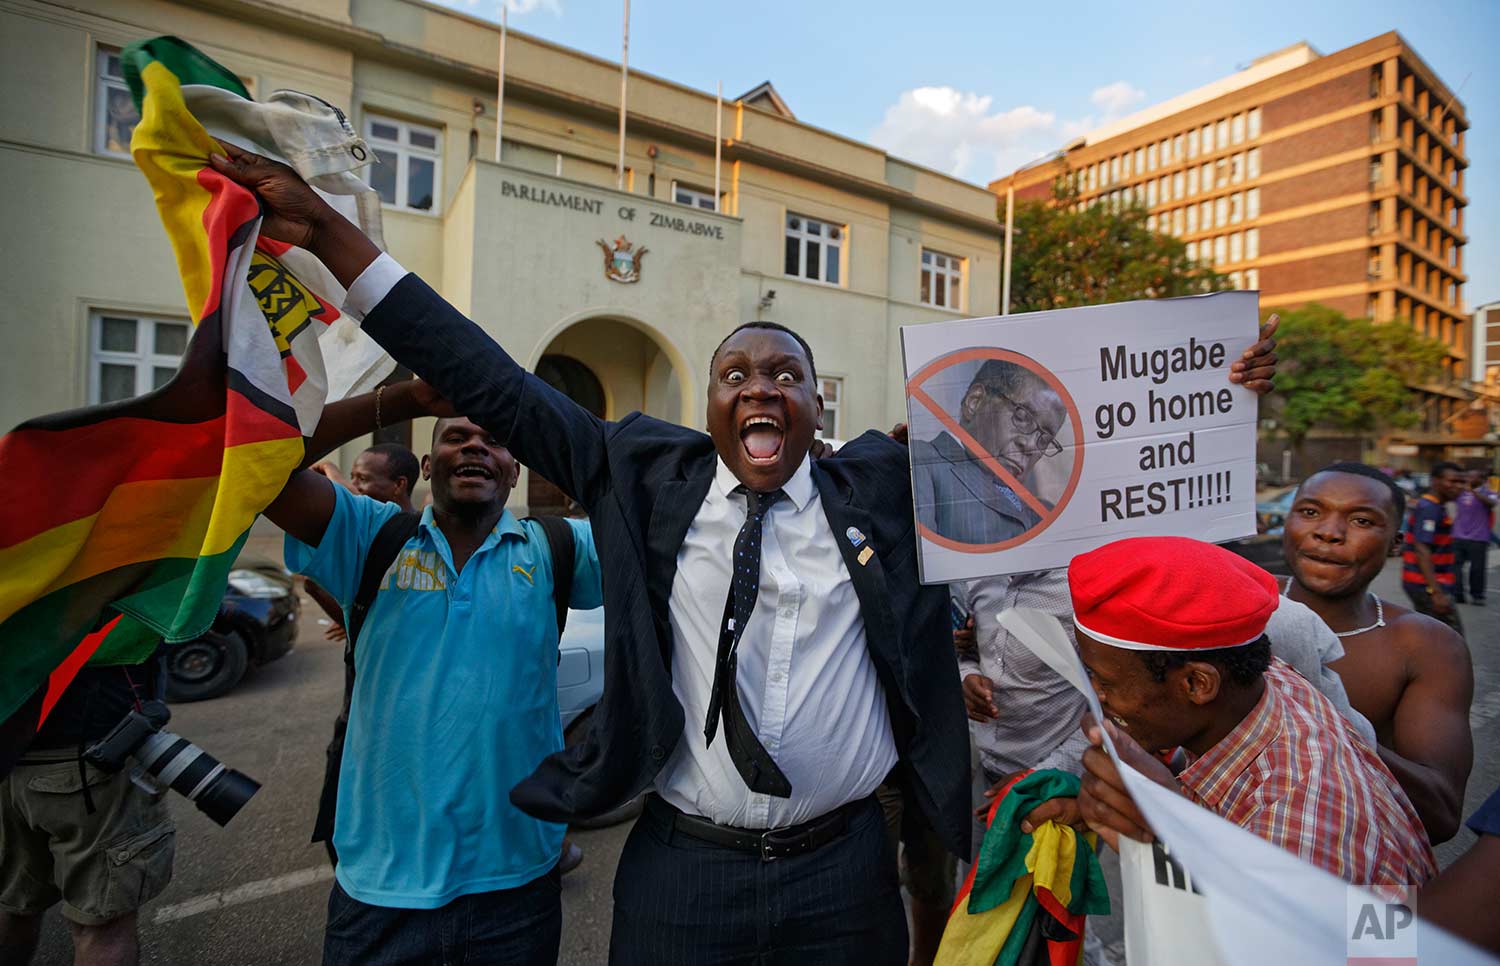  In this Tuesday, Nov. 21, 2017 photo, Zimbabweans celebrate outside the parliament building immediately after hearing the news that President Robert Mugabe had resigned, in downtown Harare, Zimbabwe. Mugabe resigned as president with immediate effec